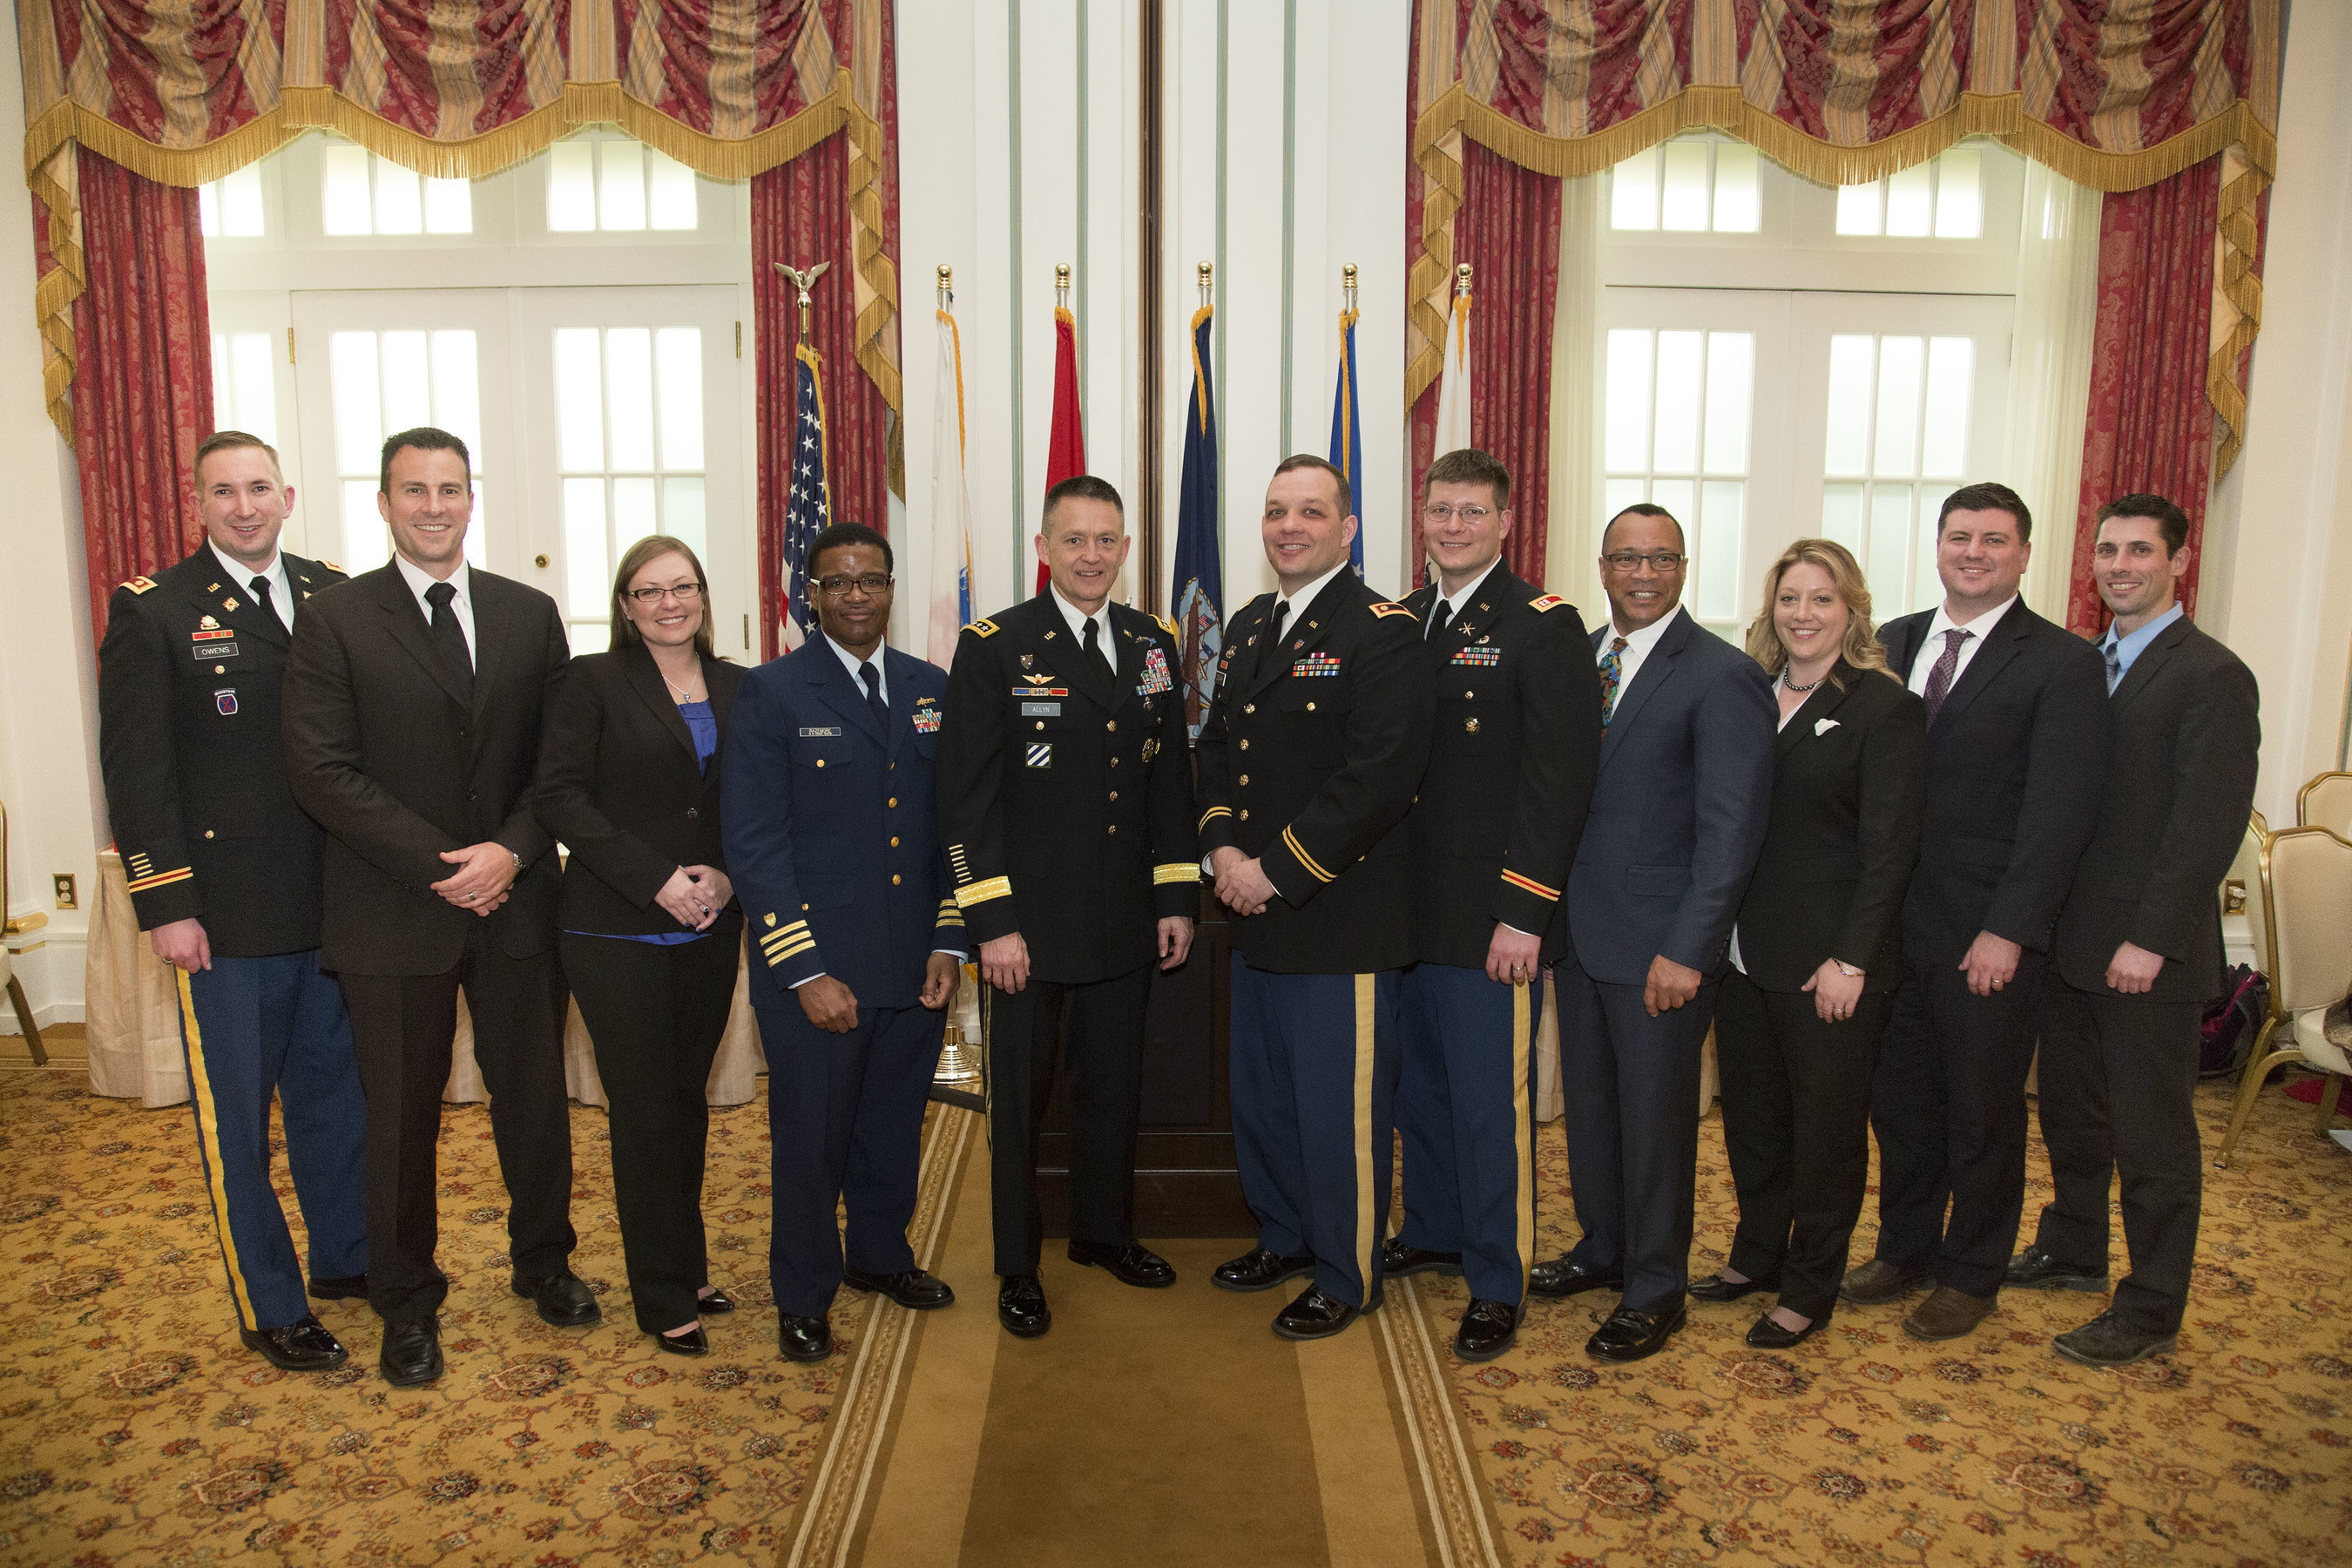 Washington, D.C., USA - March 24, 2016: Graduates of the Institute for Defense and Business IU-UNC LogMBA program pose with General Dan Allyn, the Vice Chief of Staff of the Army, who delivered the commencement address for the graduation ceremony held at the Army and Navy Club. Photo by Ian Wagreich / (C) Ian Wagreich Photography